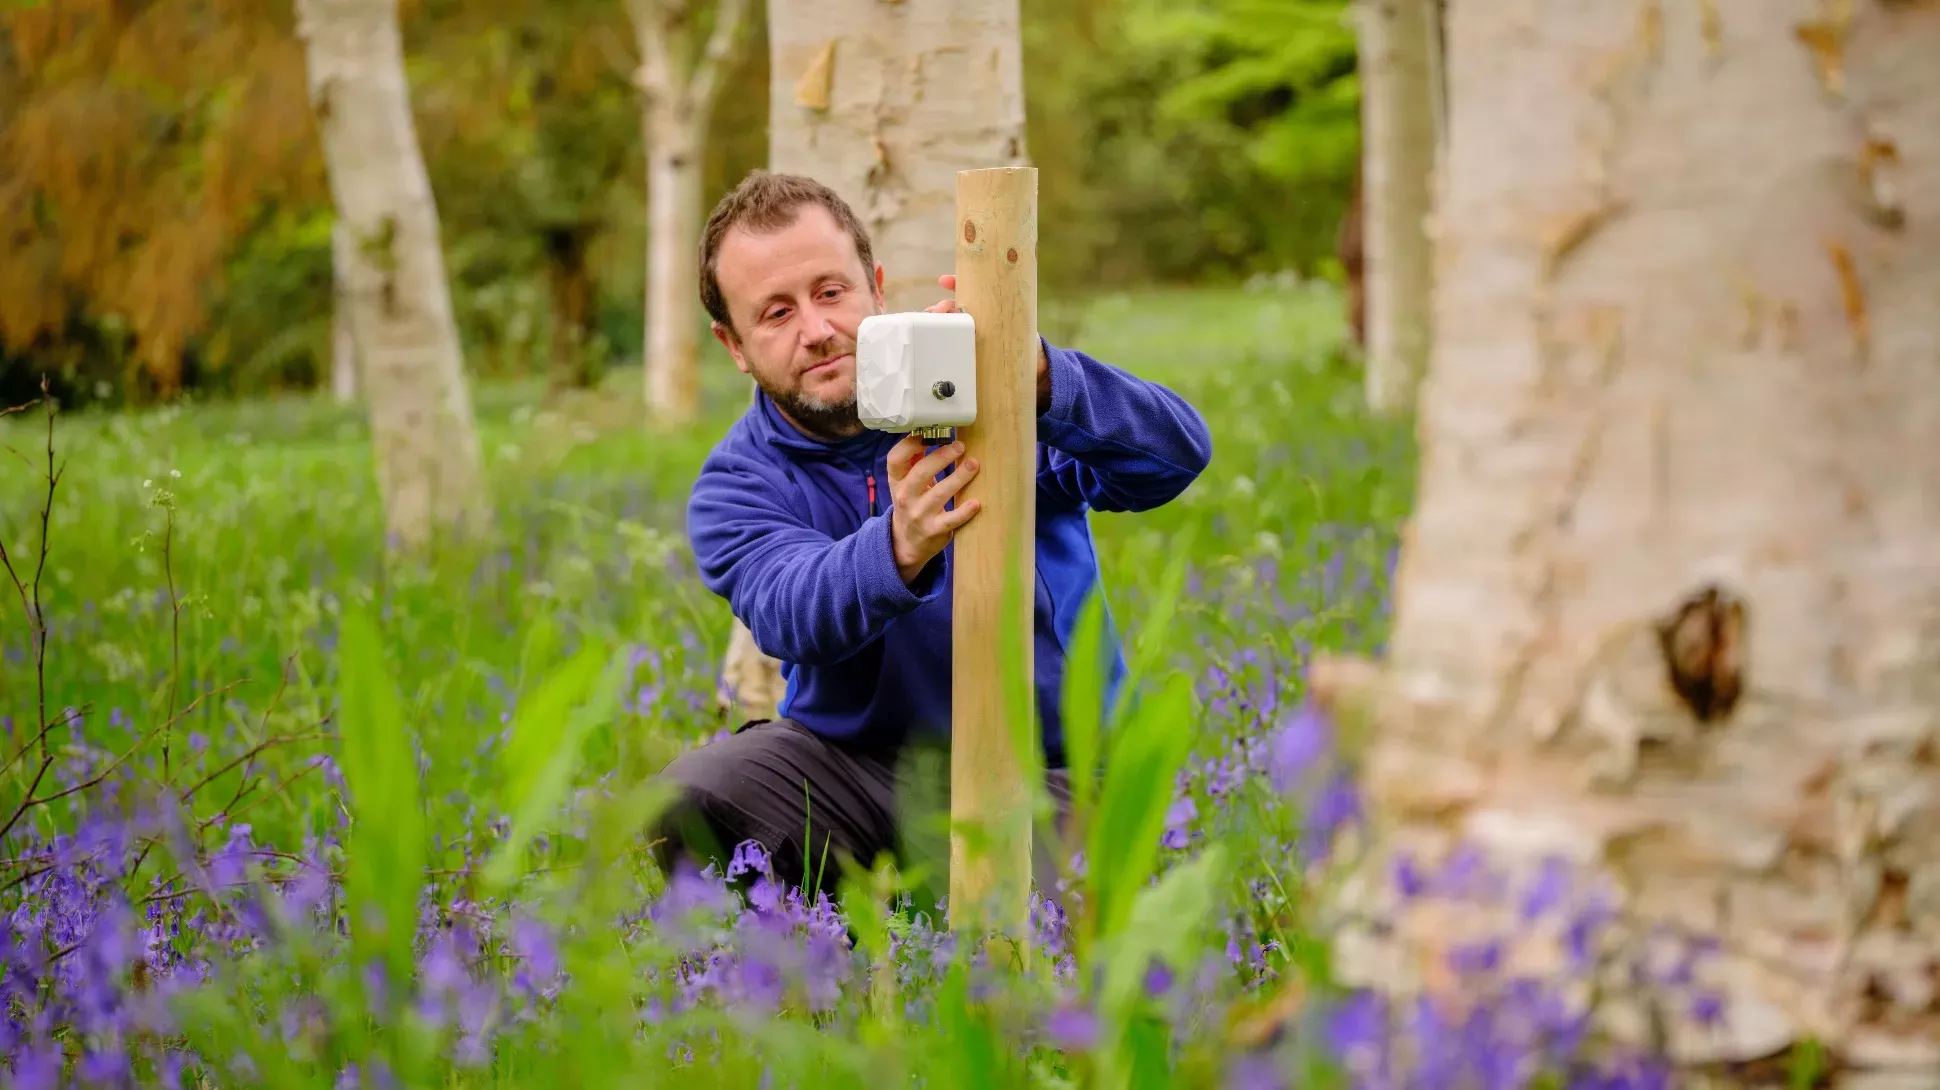 A person fixes a scientific instrument to a wooden pole in a woodland